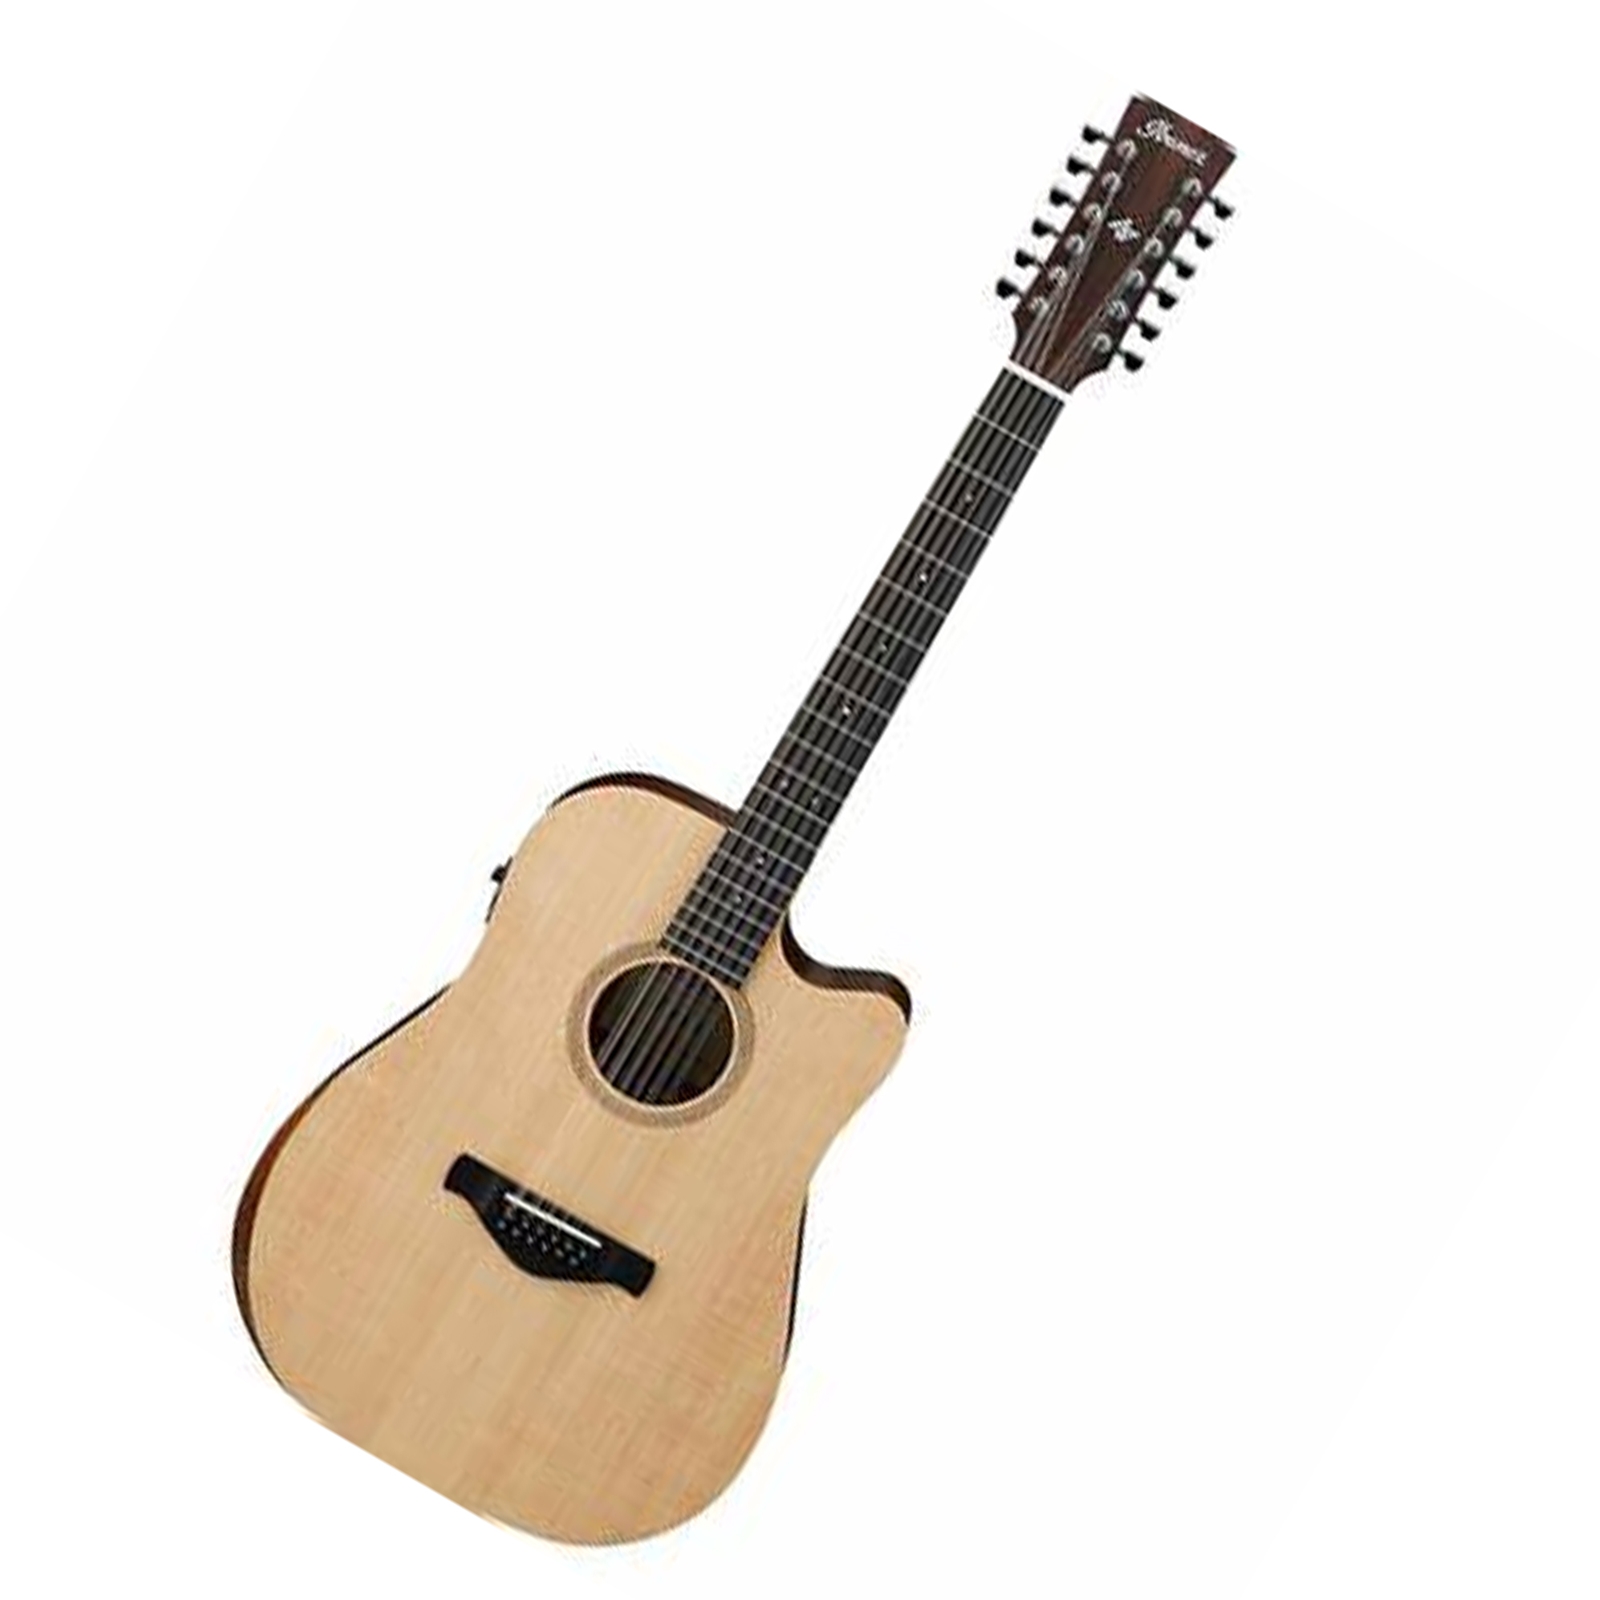 Ibanez AW152CE Artwood Series Acoustic-Electric Guitar